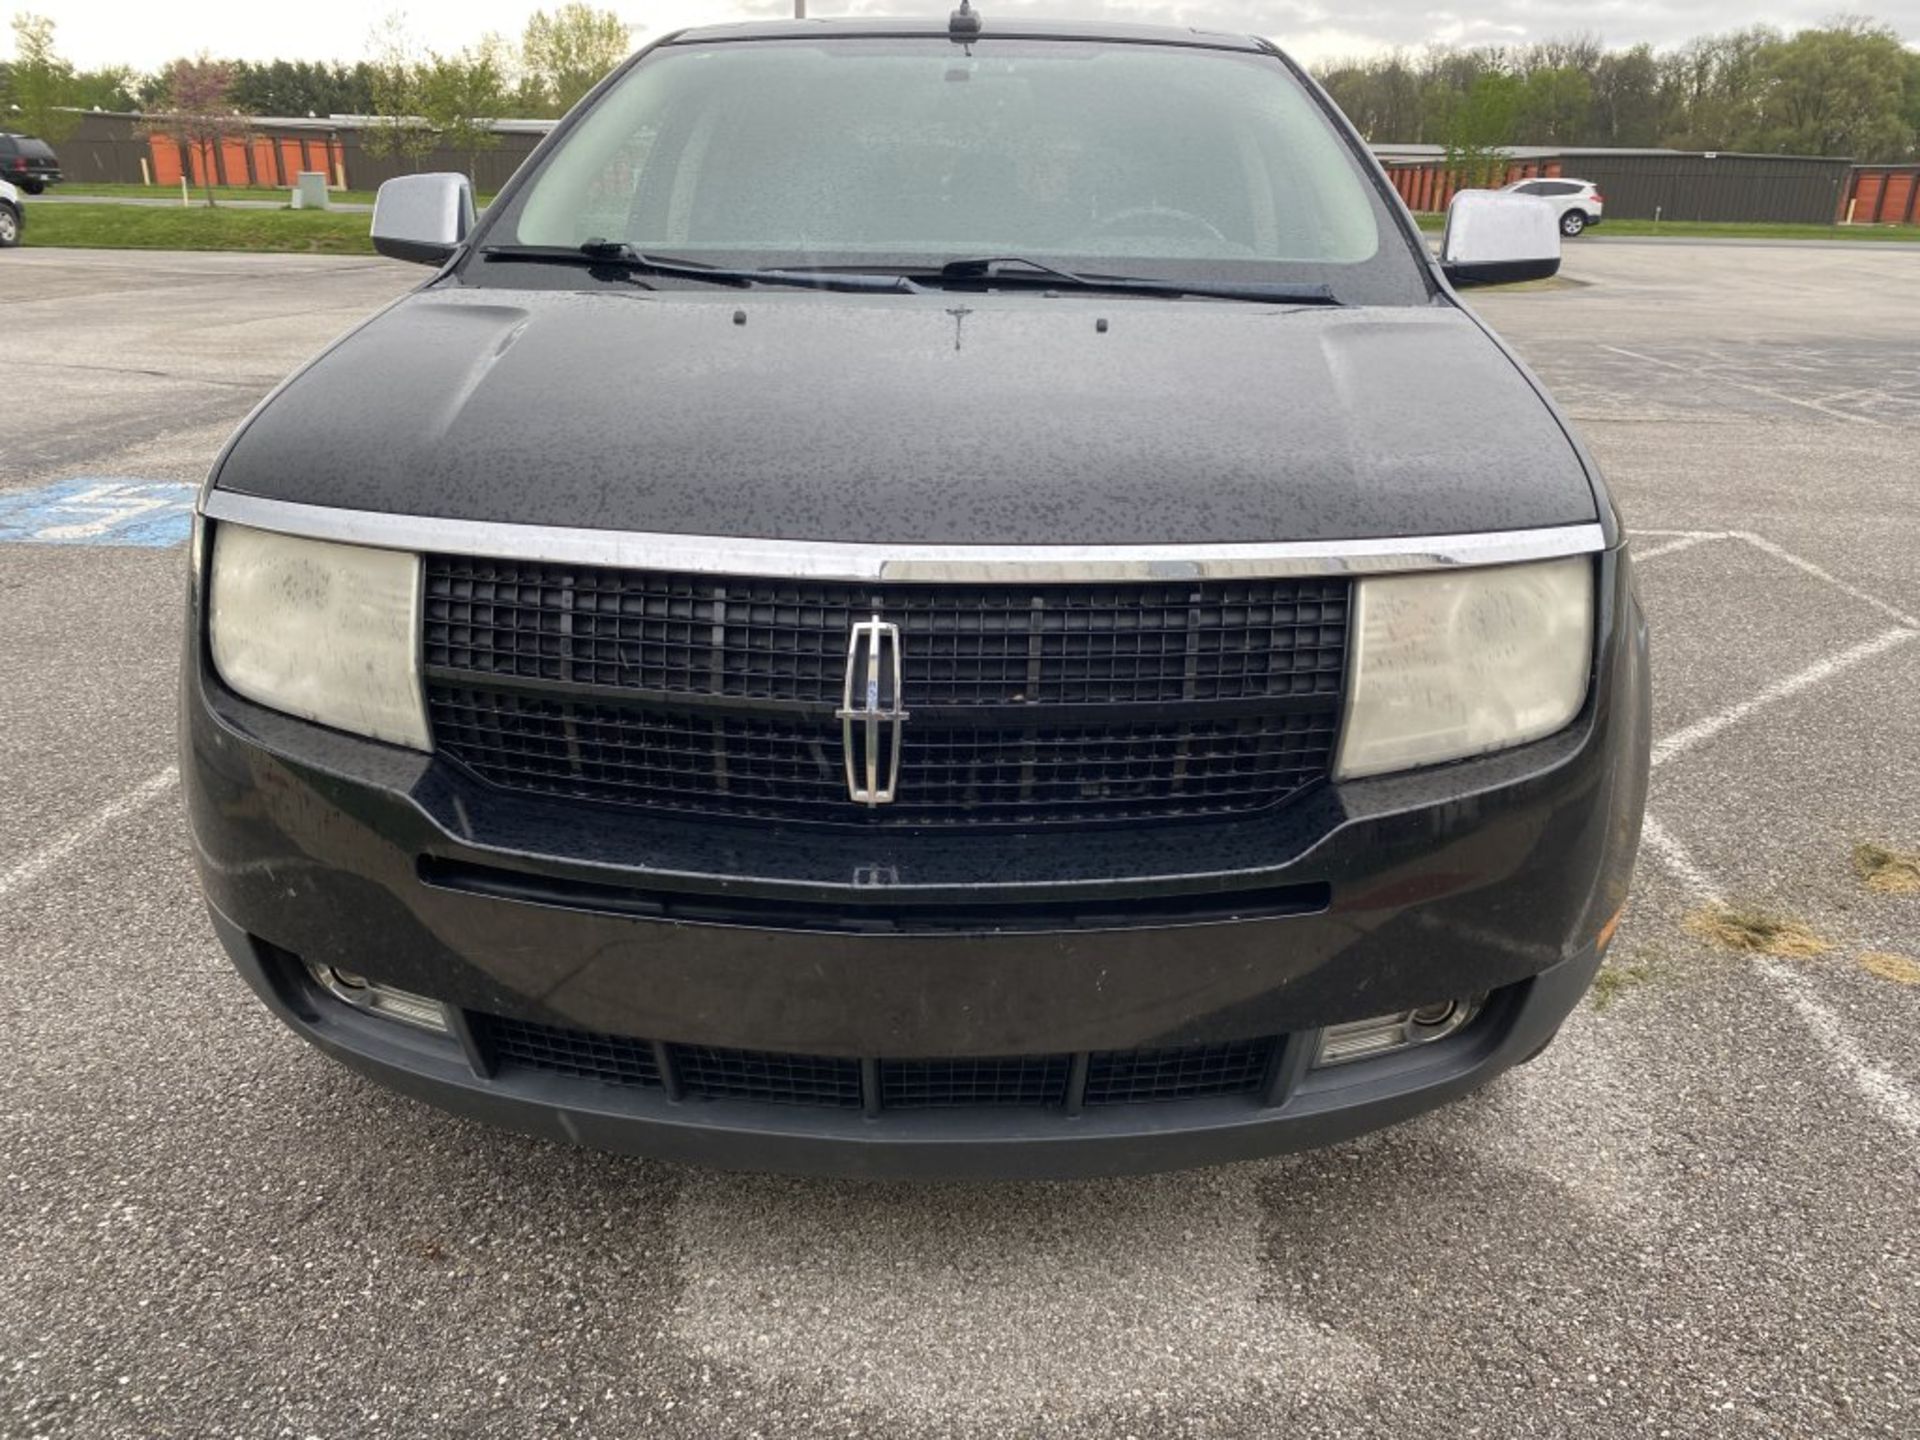 2008 LINCOLN MKX LIMITED EDITION, AUTO TRANS, AM/FM-CD-AUX, HEAT/AC SEATS, MOONROOF, PW, PL, - Image 8 of 21